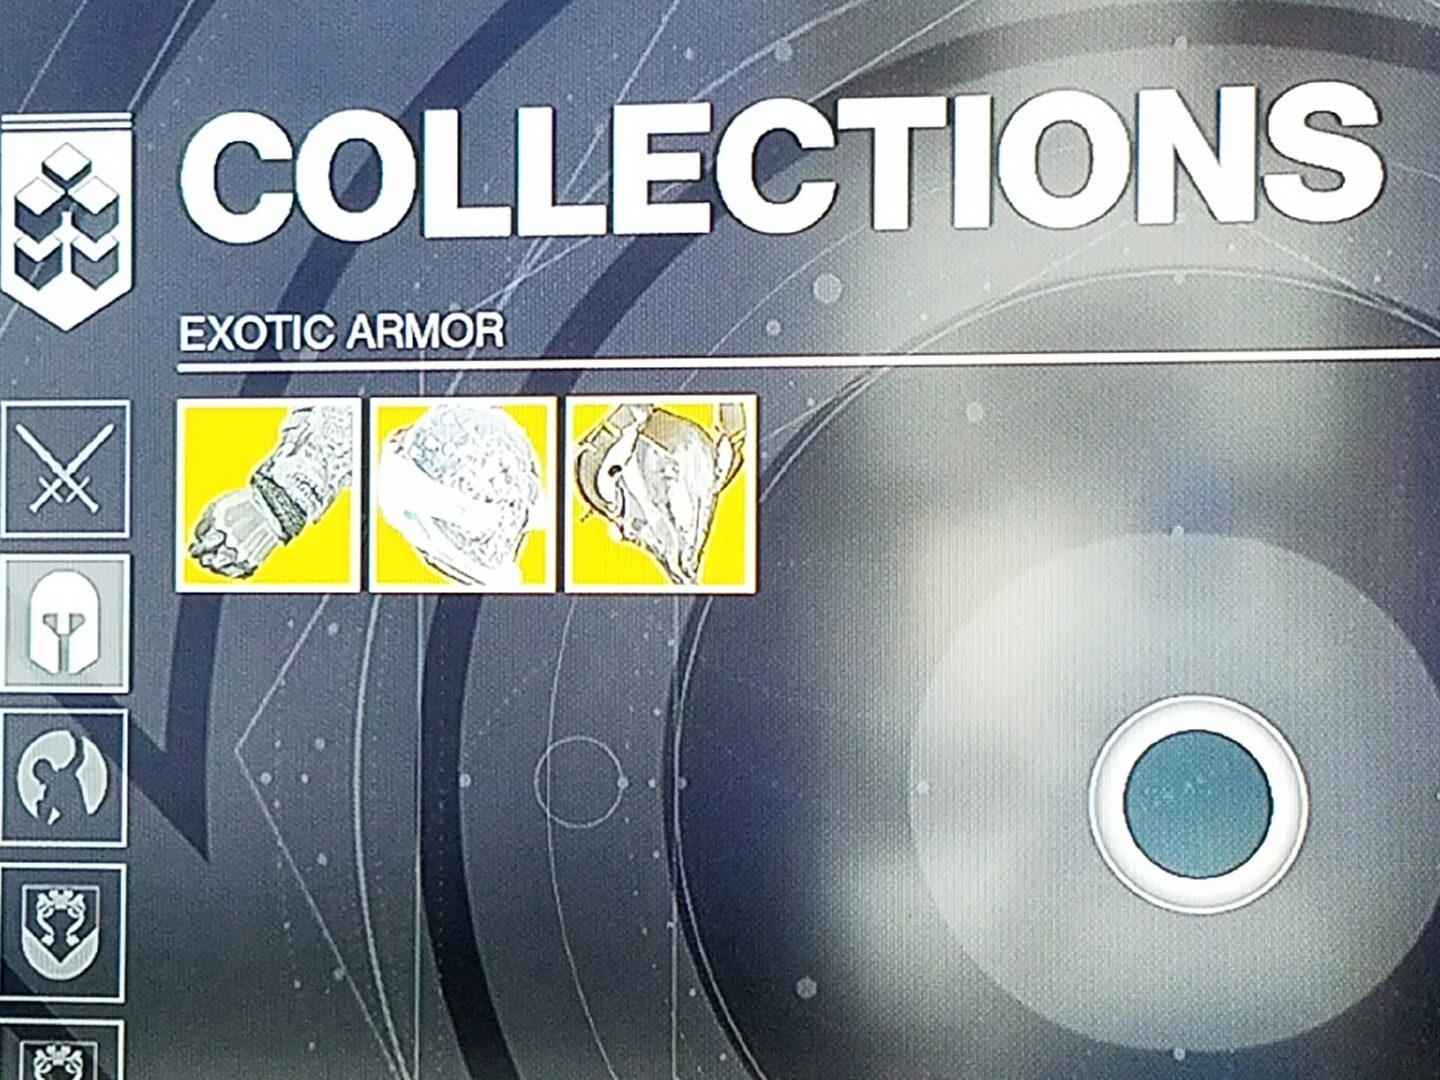 A collection of exotic armor items in the video game.